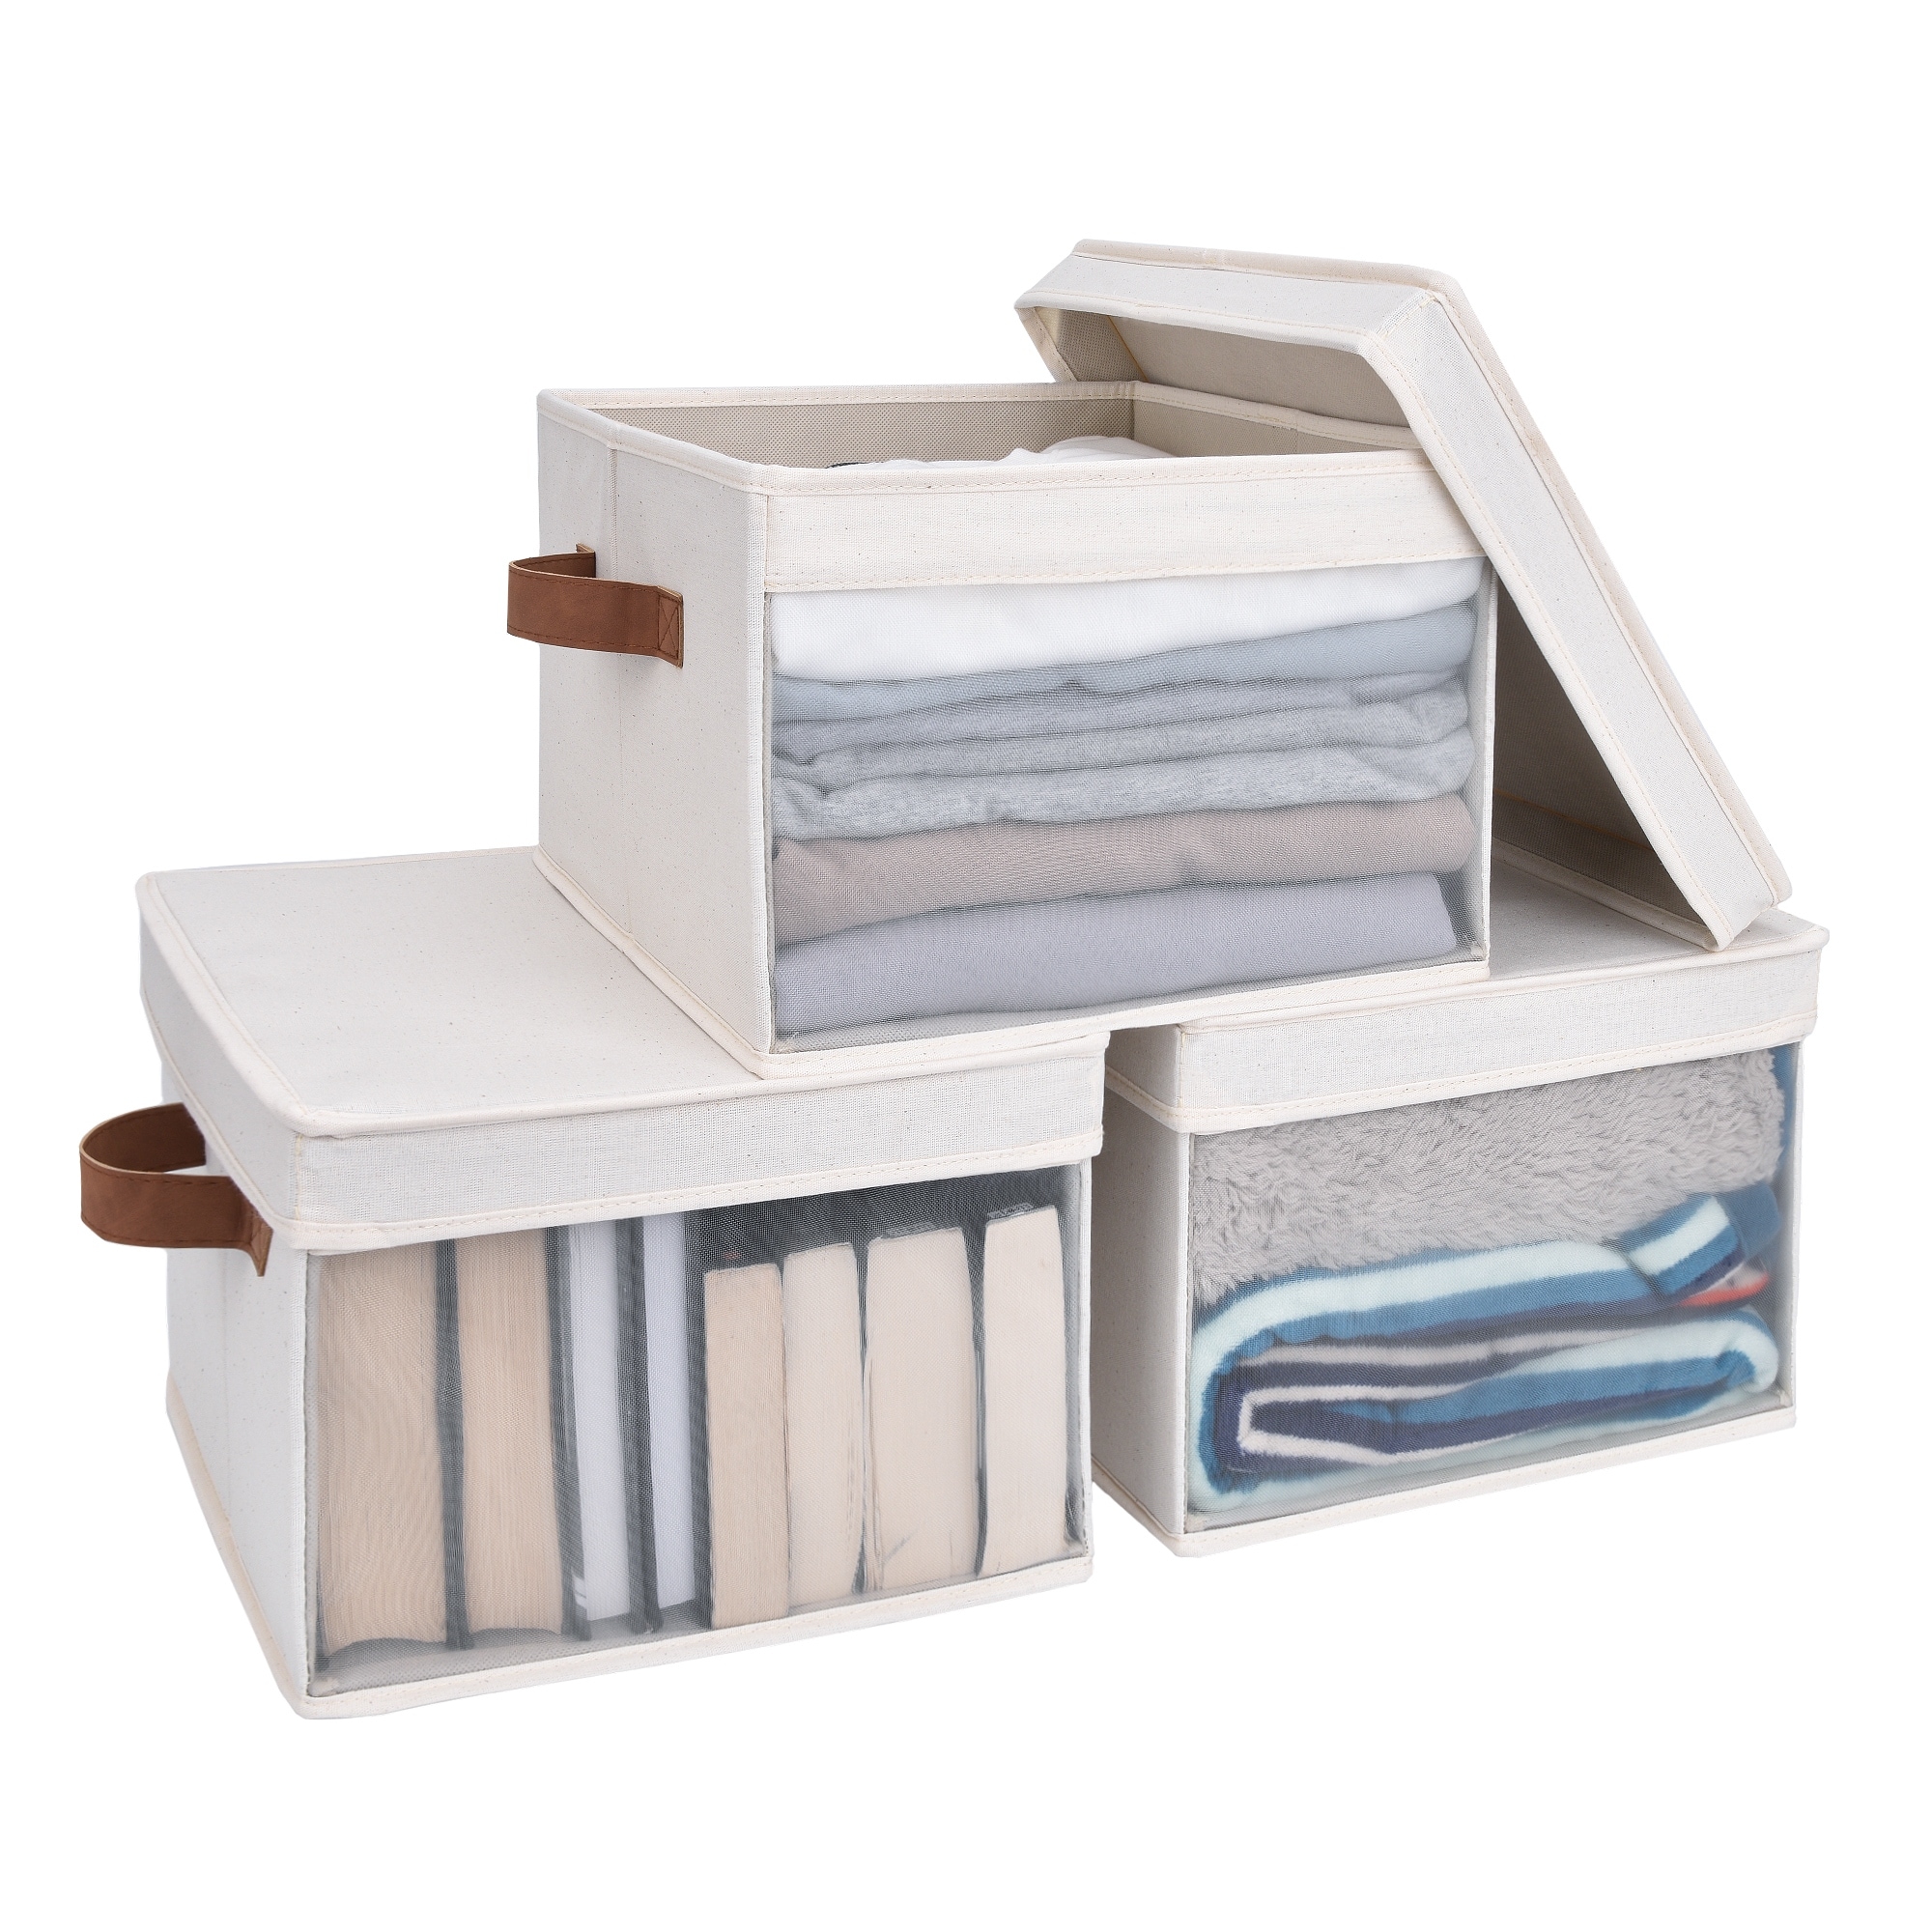 https://ak1.ostkcdn.com/images/products/is/images/direct/49417acce24fa802a20d9f3ab77030f7973617eb/StorageWorks-Foldable-Fabric-Storage-Bins-with-Lids.jpg